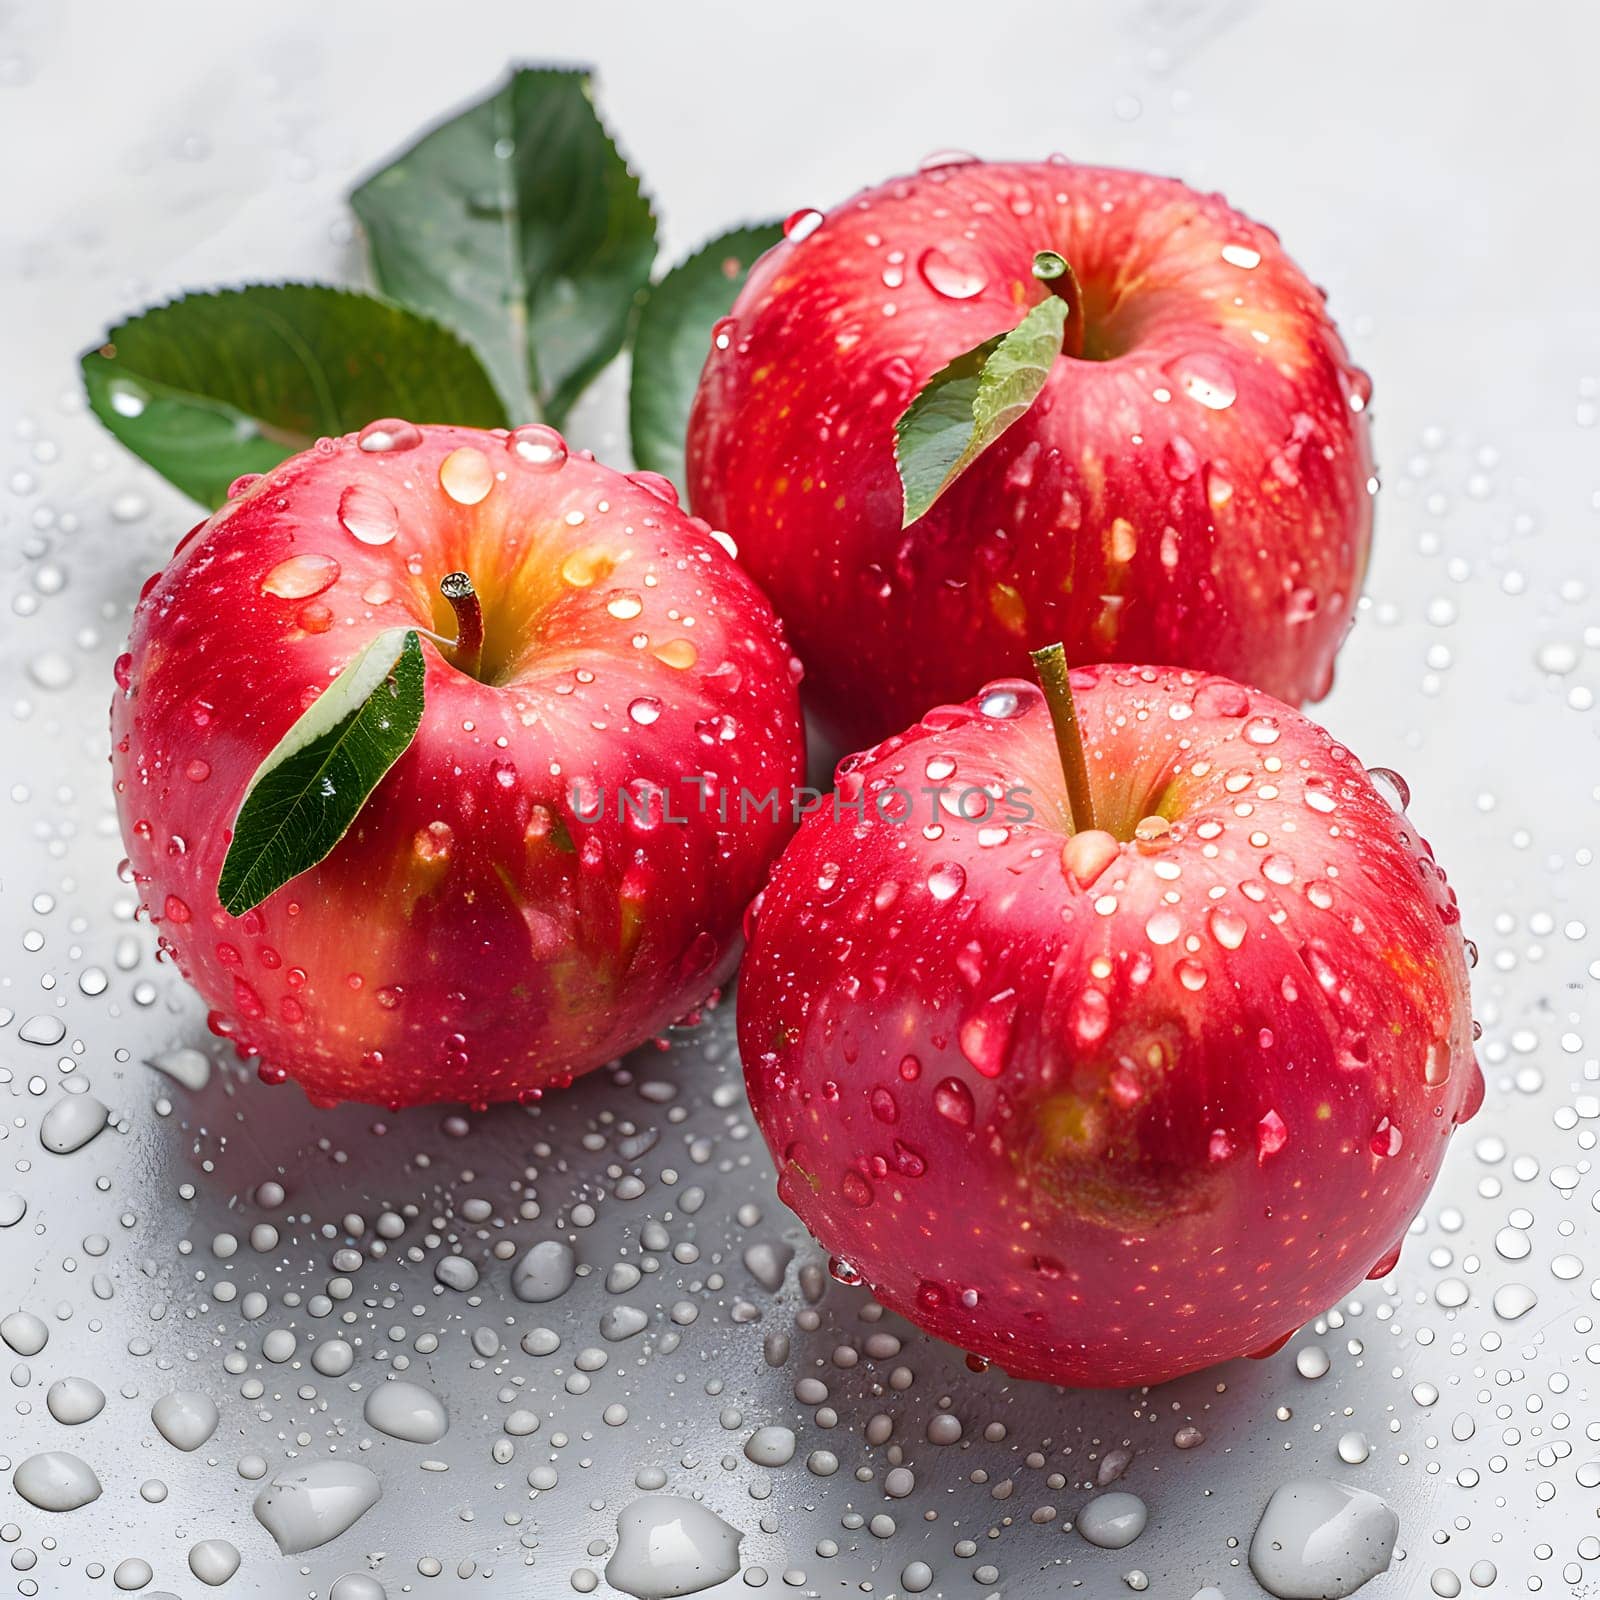 Three ripe red apples, featuring vibrant green leaves and glistening water drops, are a staple food that can be enjoyed as a nutritious ingredient or snack